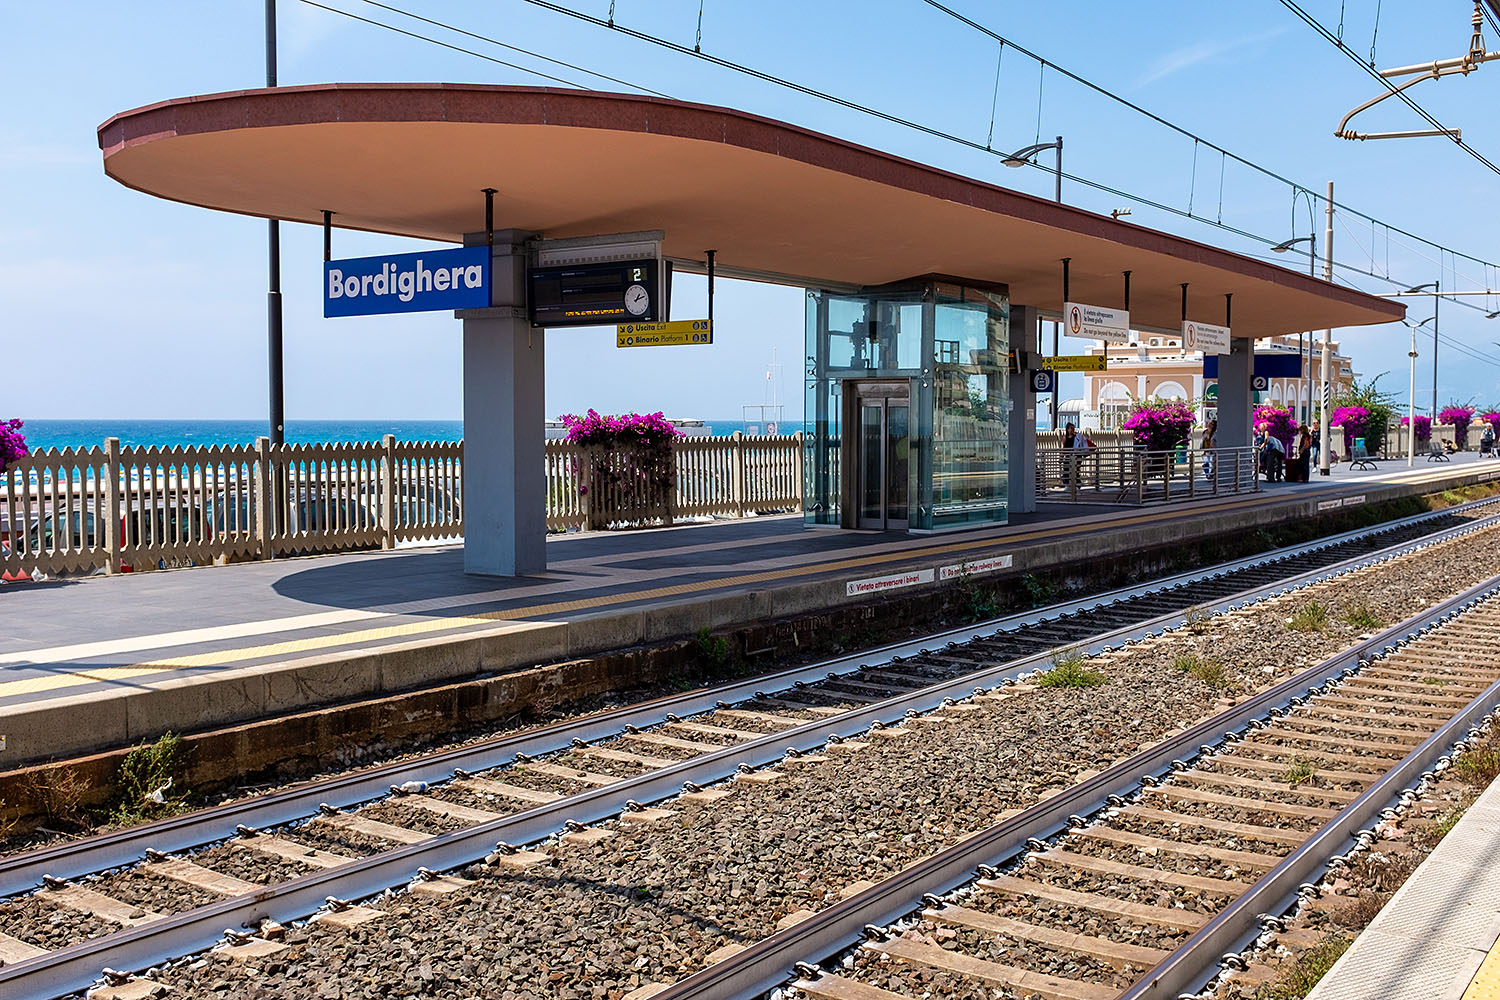 The Bordighera train station even features an elevator providing wheelchair access to the tracks